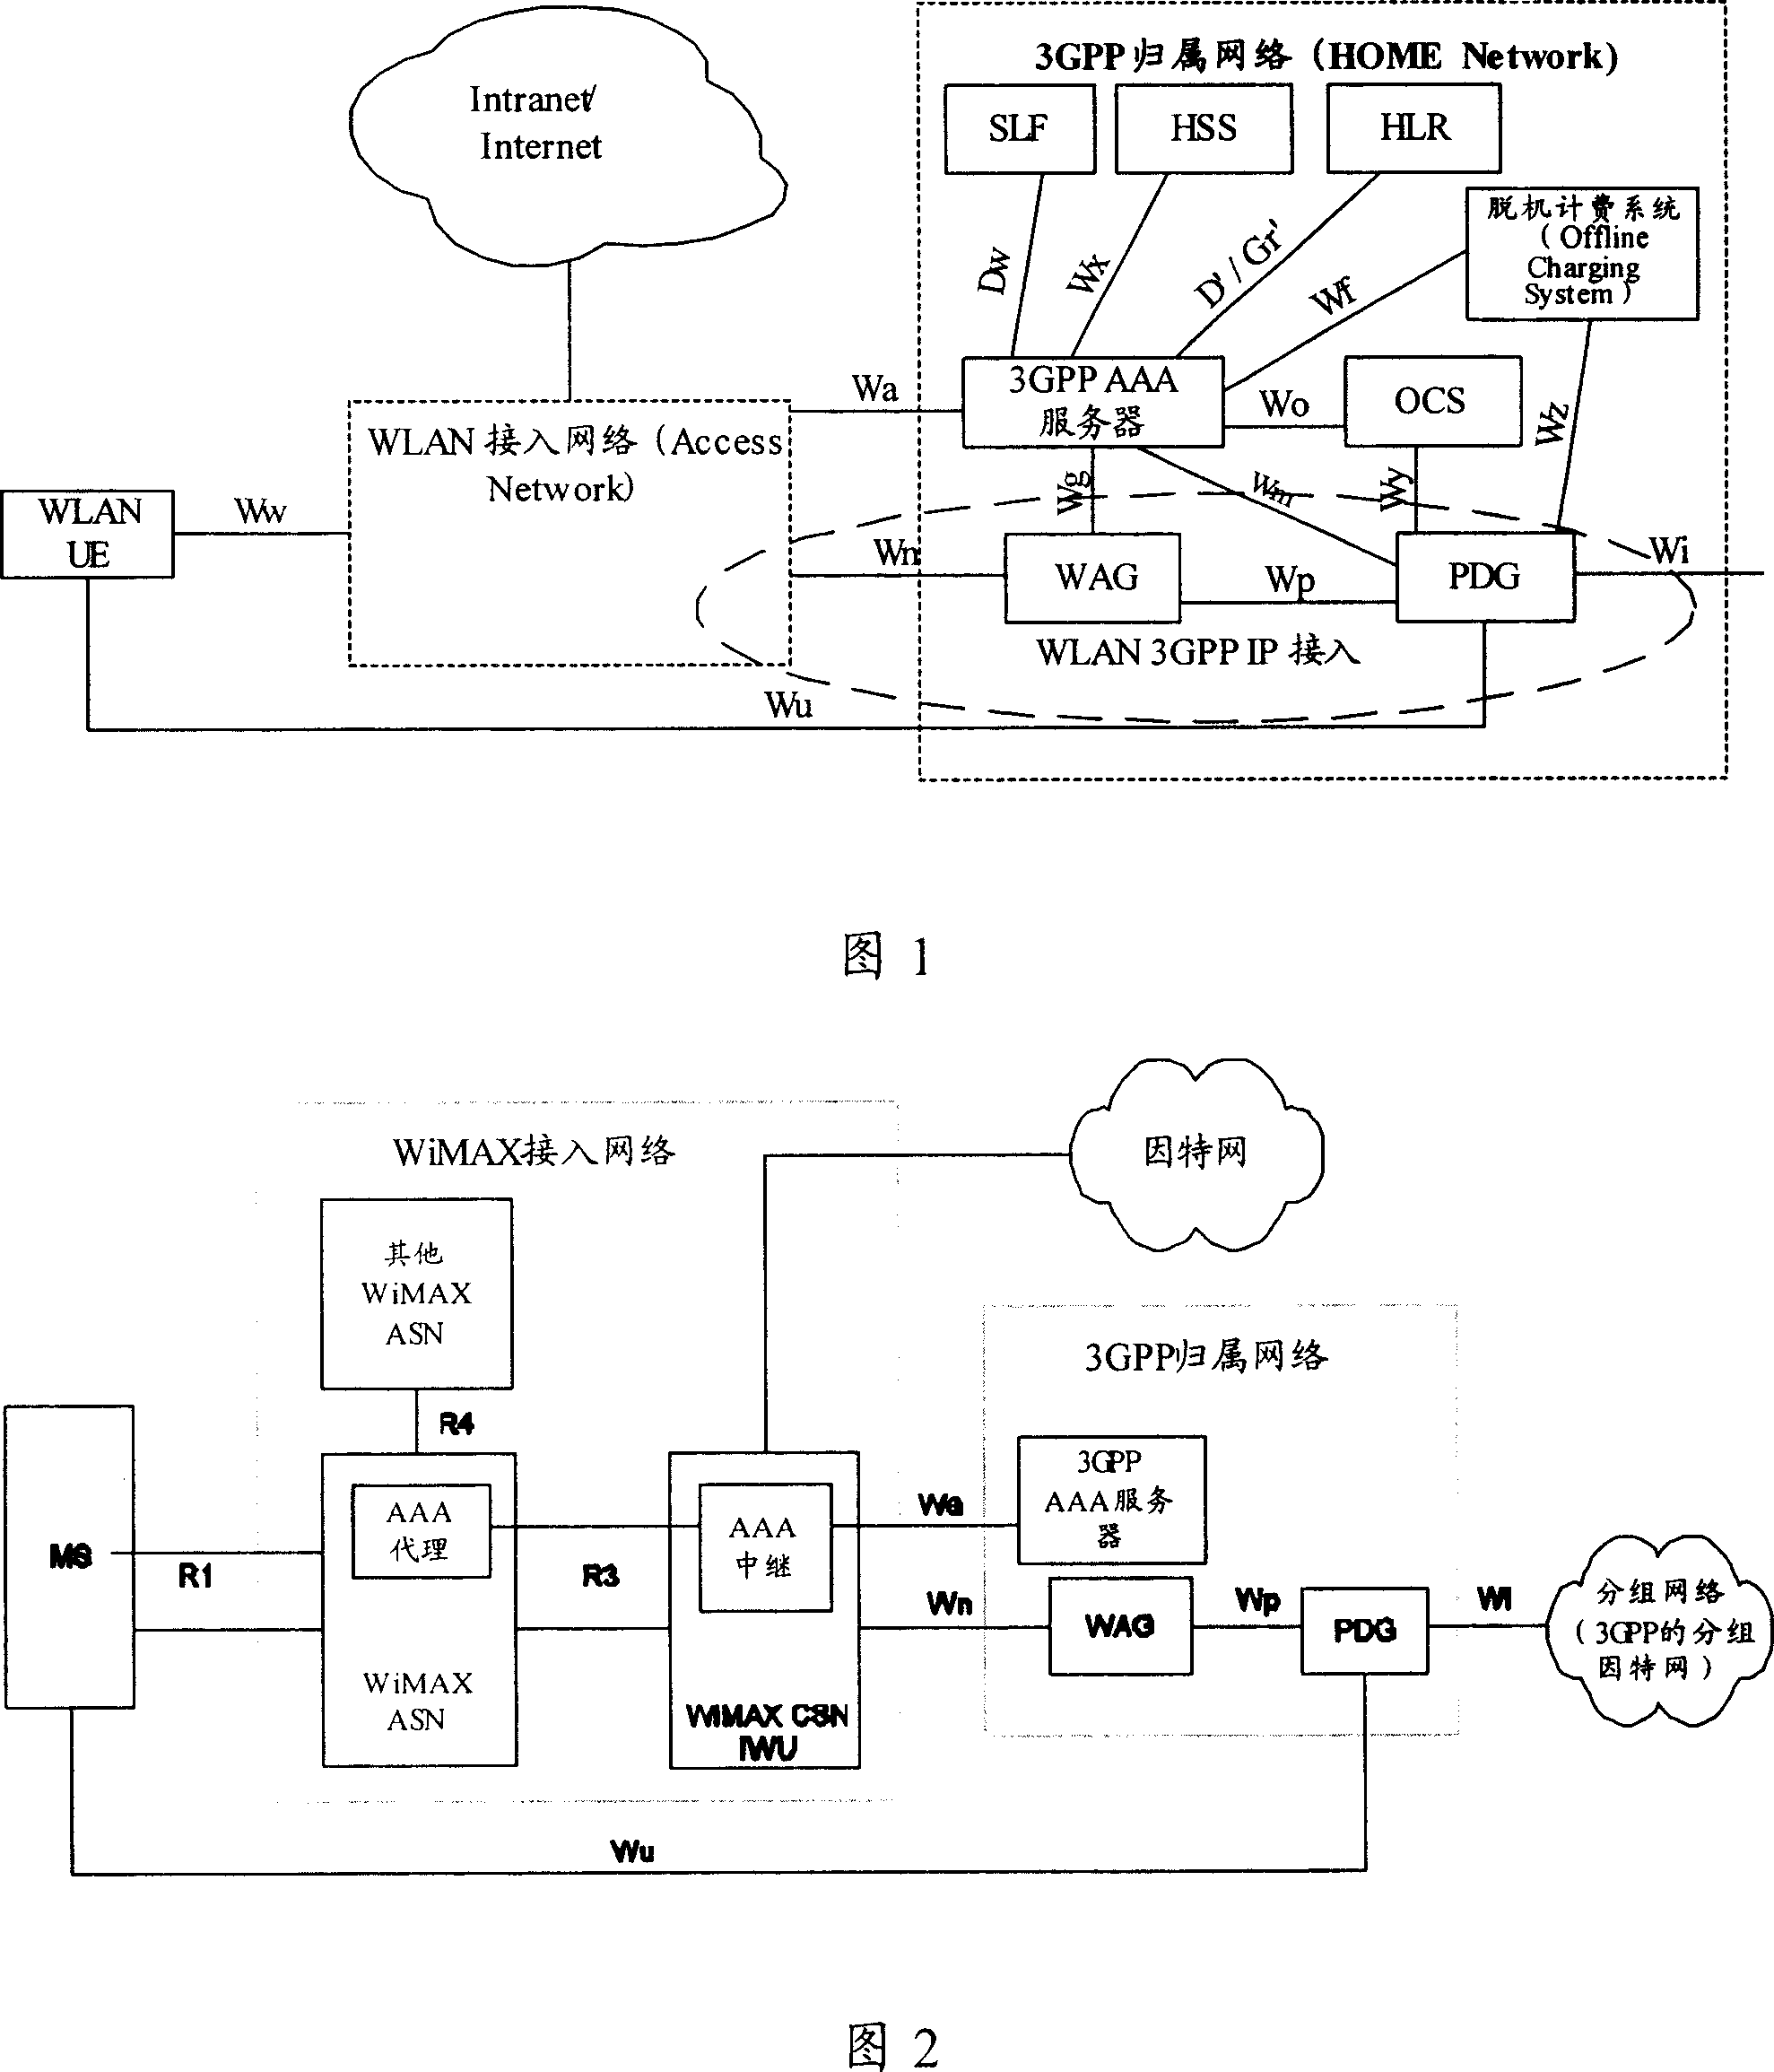 Processing method for ensuring information safety in communication system